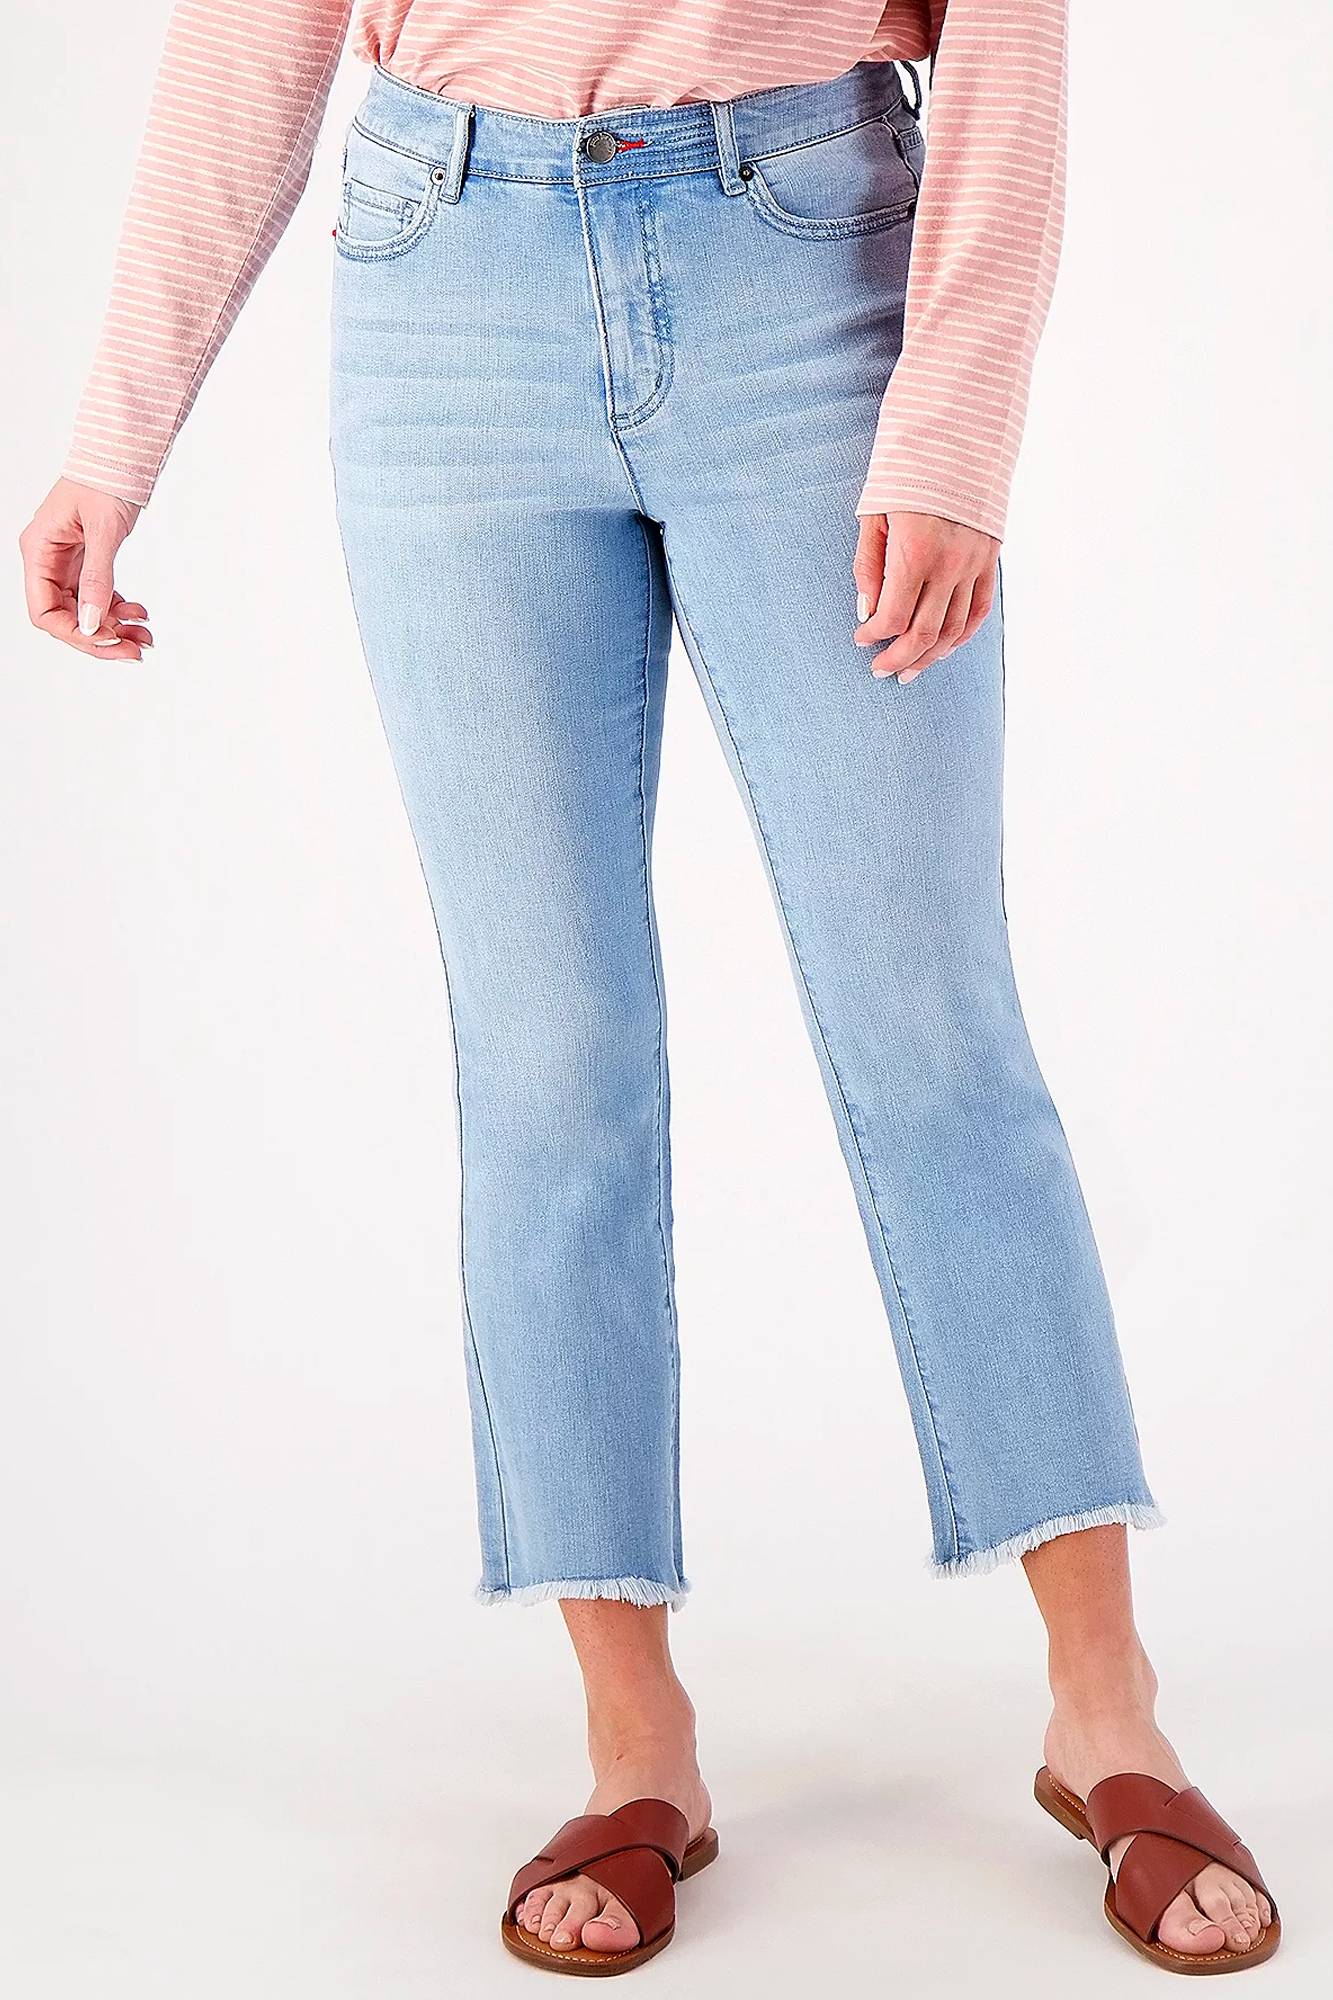 How to Shorten Your Cropped Flare Jeans (and Keep the Raw Hem